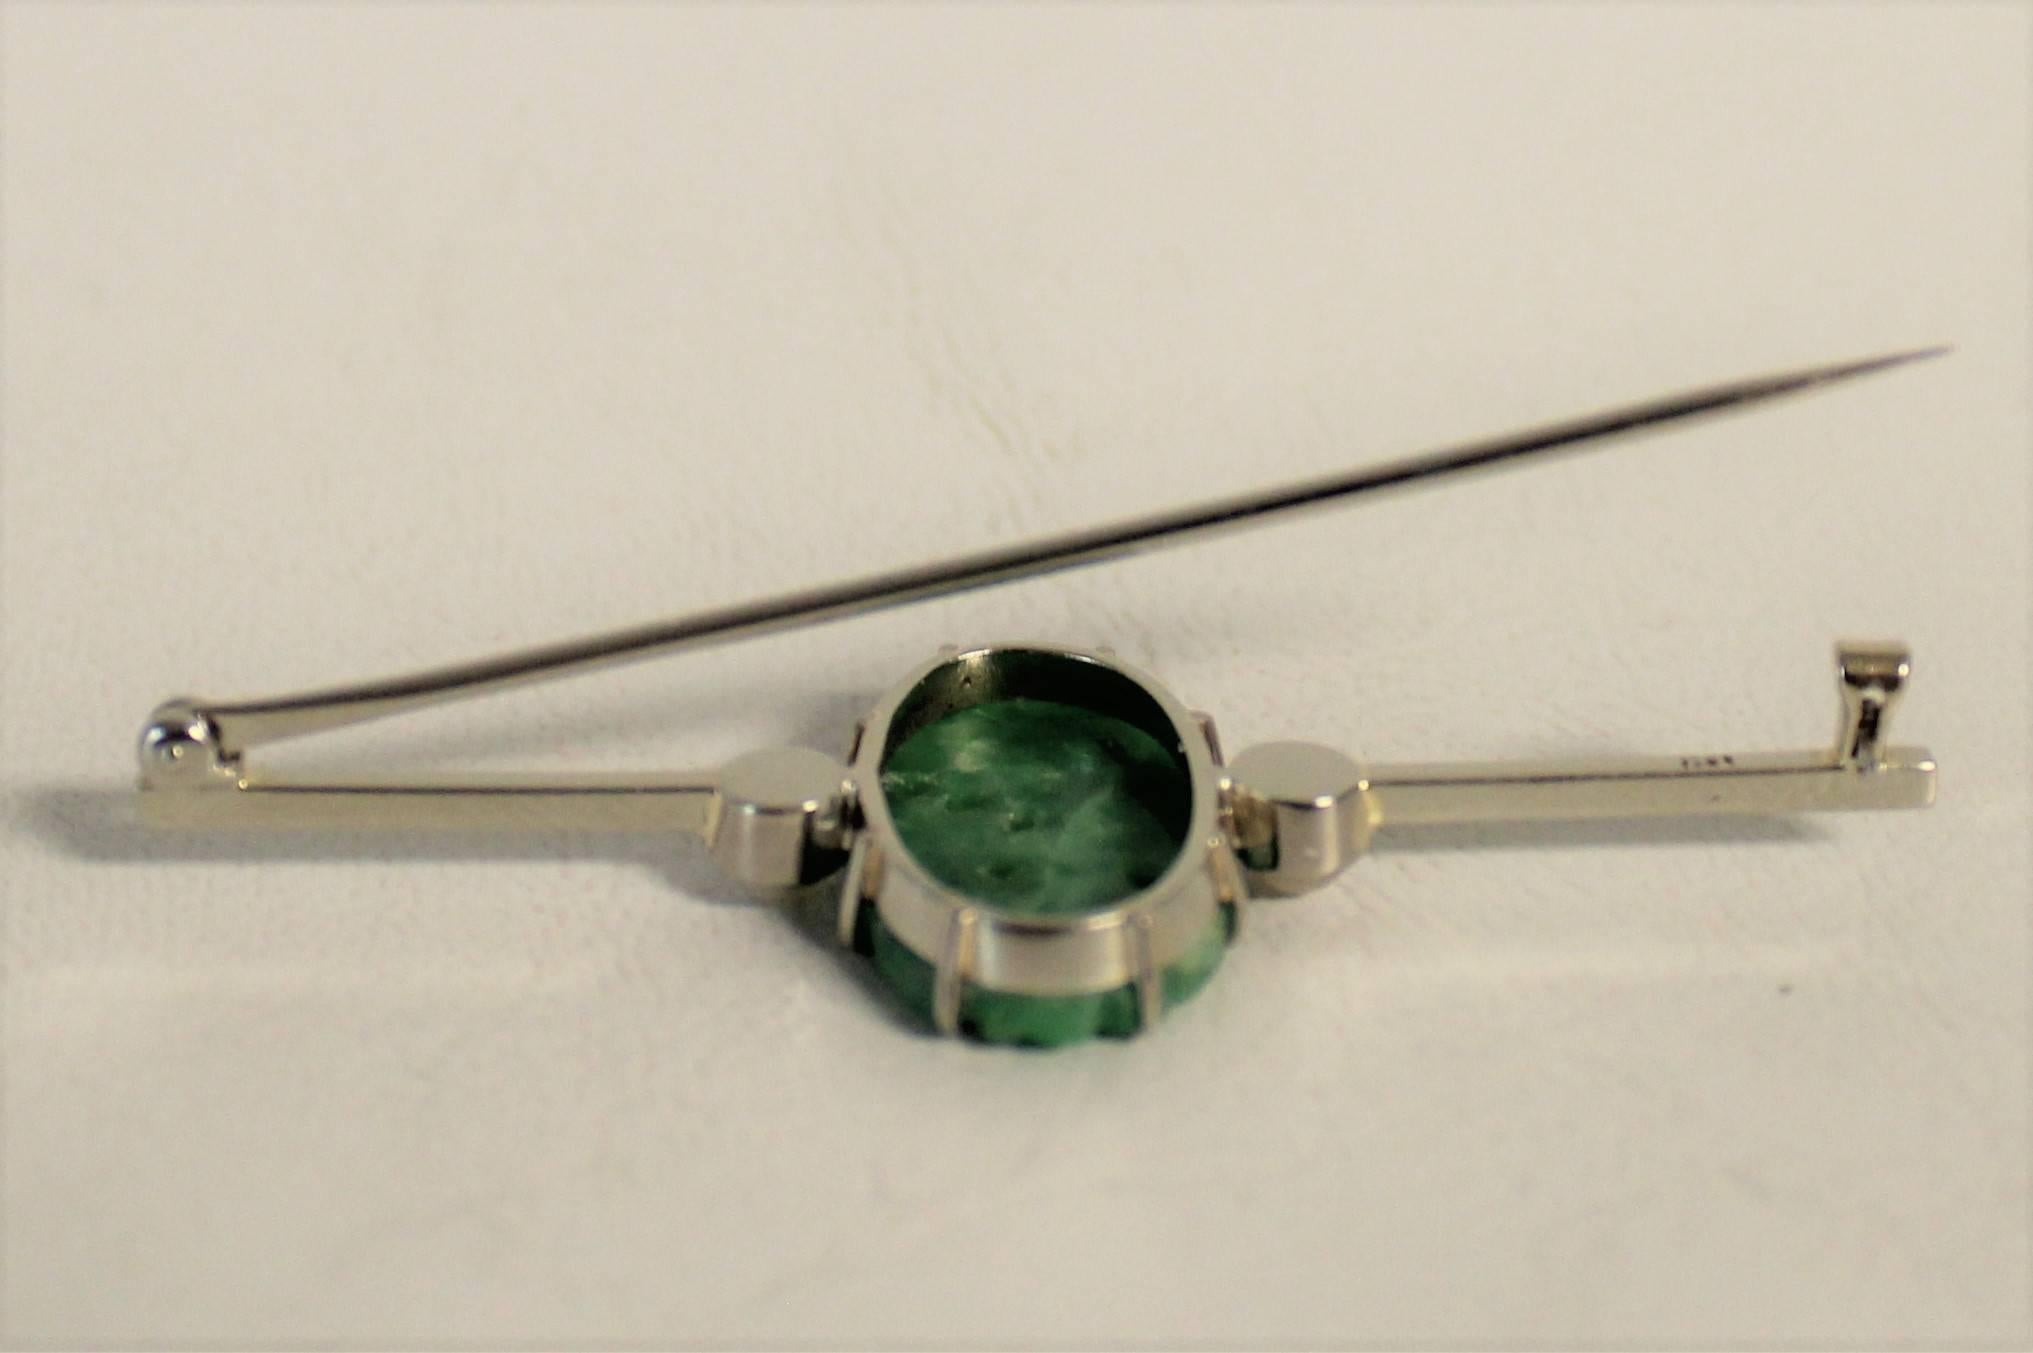 18-Karat White Gold and Jade Brooch with Pearls In Excellent Condition For Sale In Hamilton, Ontario